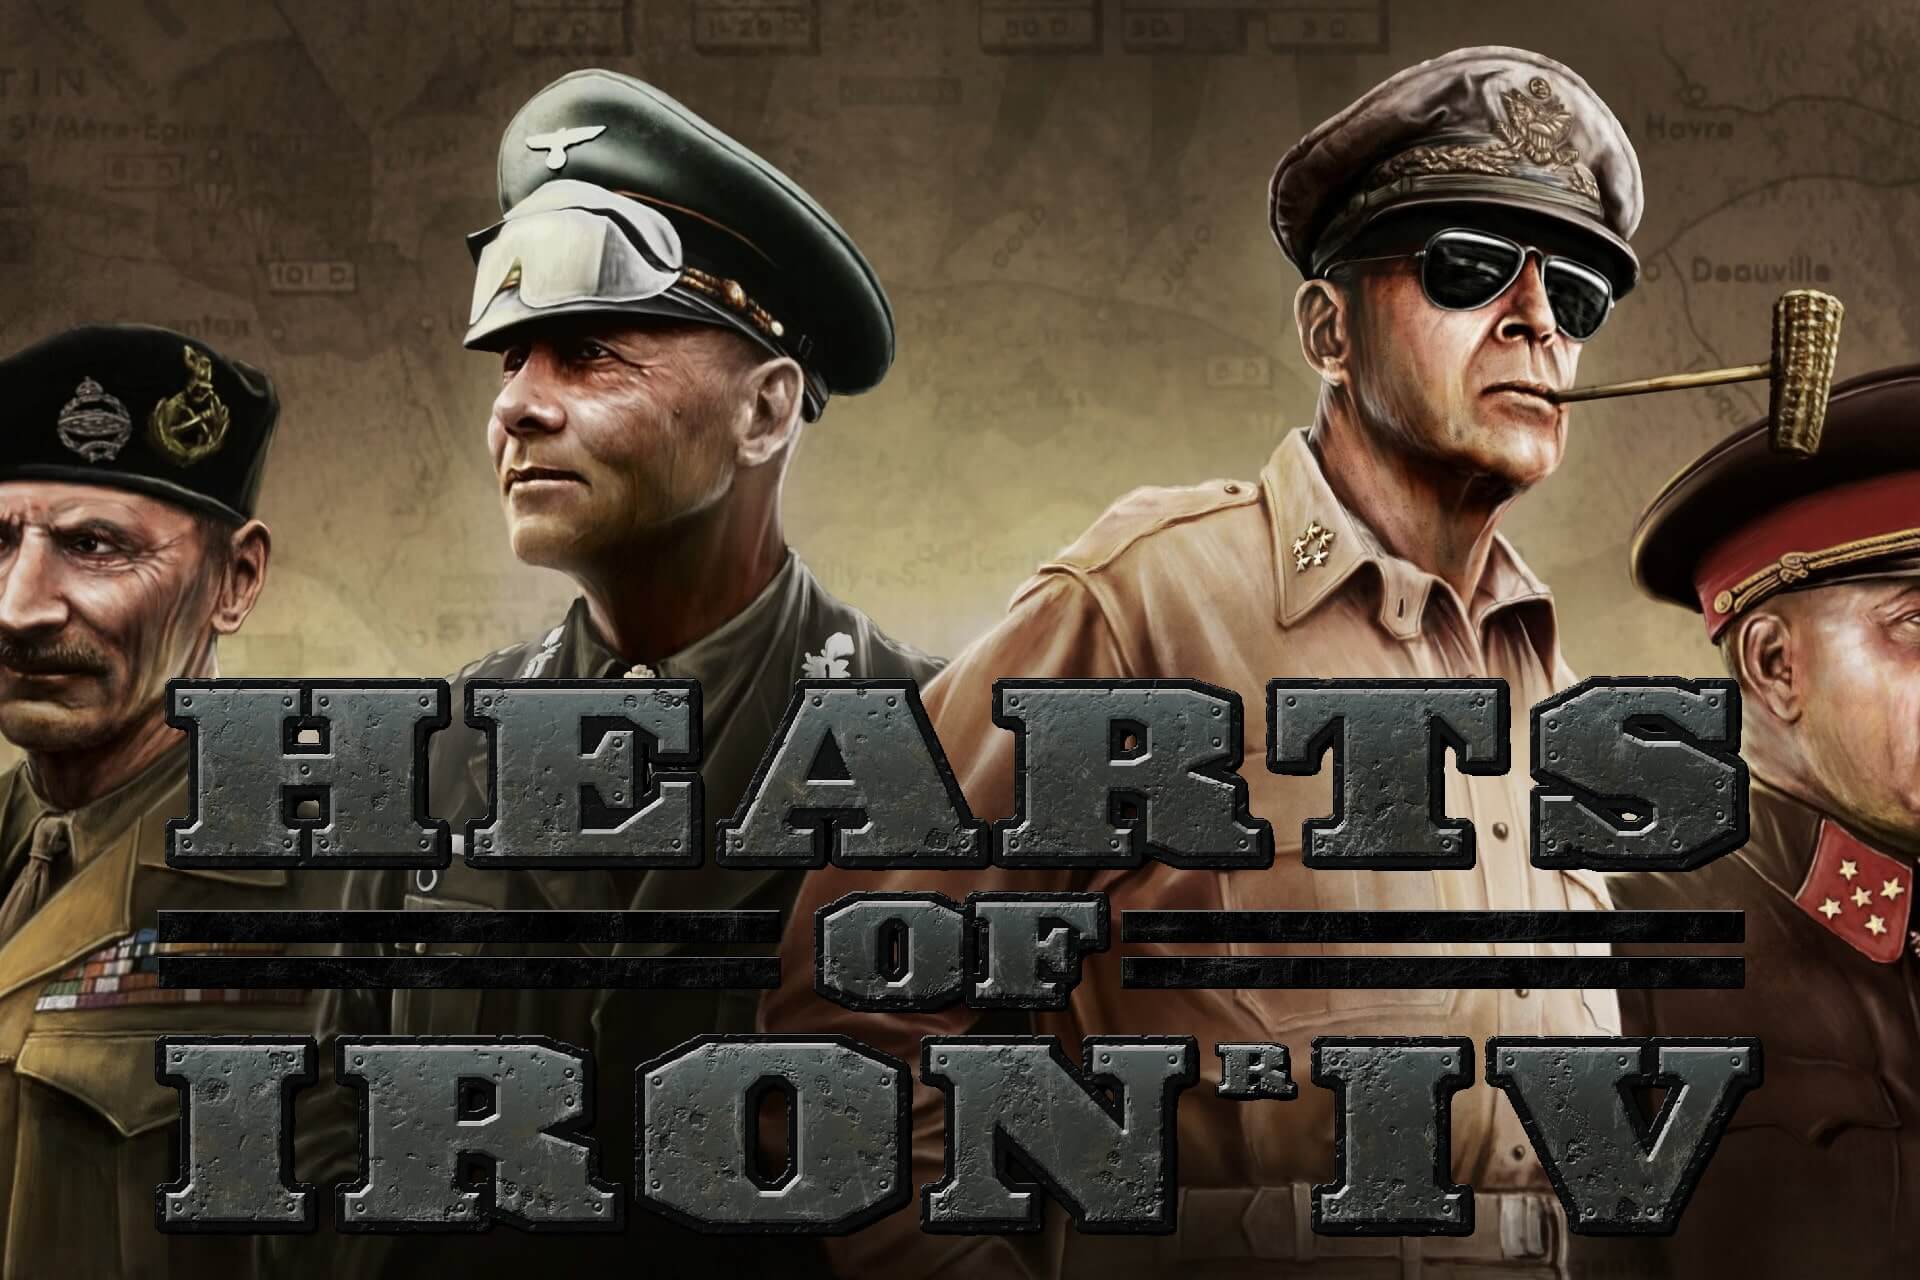 fix Hearts of Iron 4 lag with a VPN